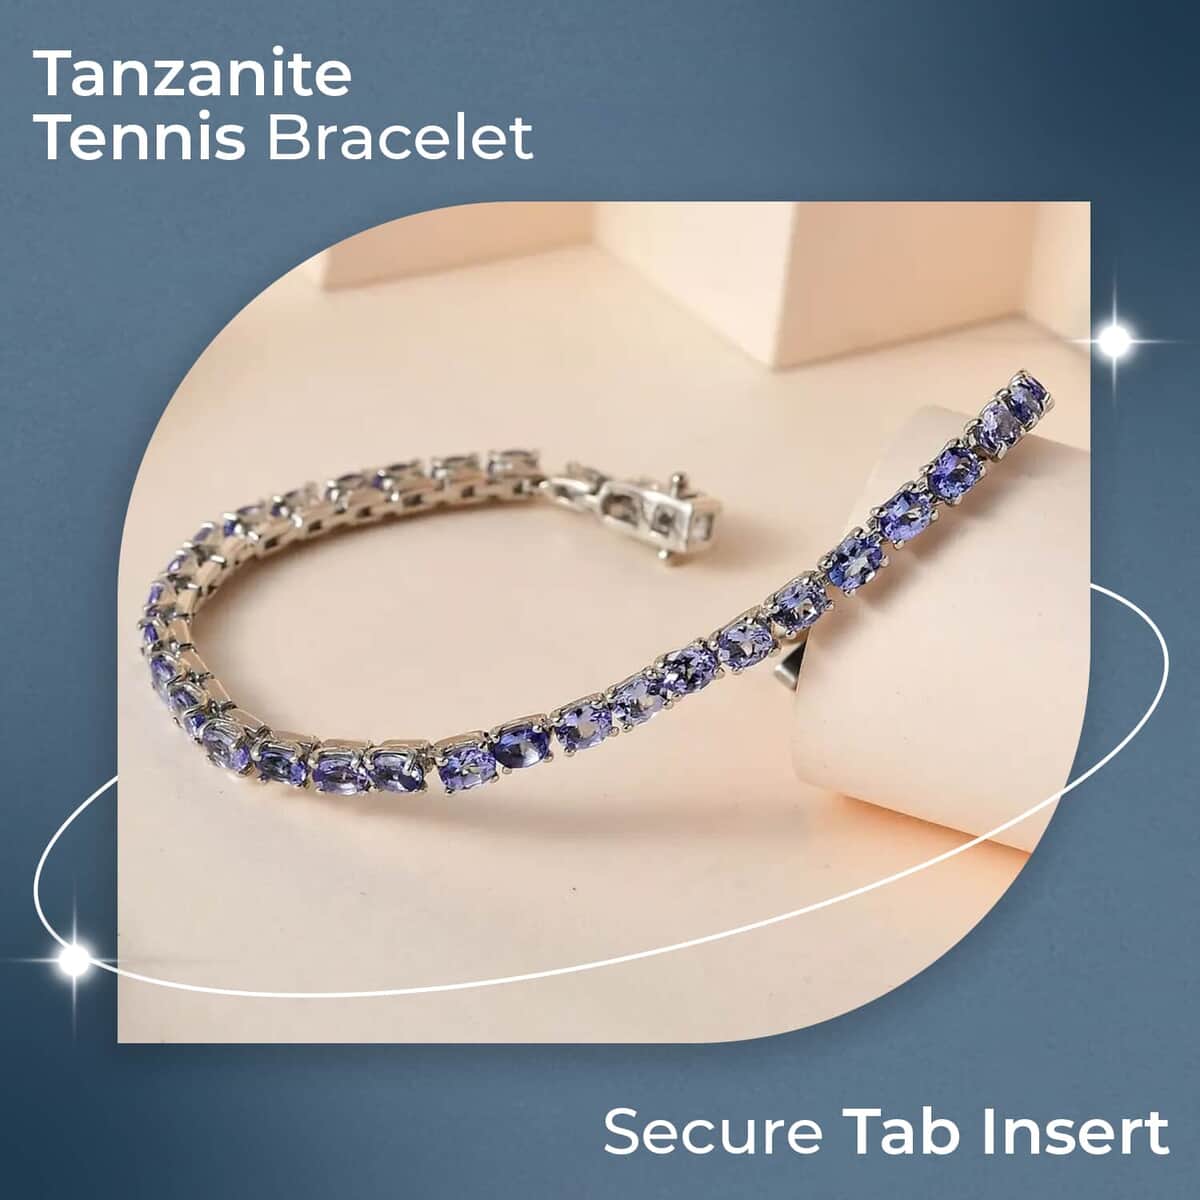 Tanzanite 7.20 ctw Tennis Bracelet, Platinum Over Sterling Silver Bracelet, Tanzanite Jewelry, Gifts For Her (6.50 In) image number 1